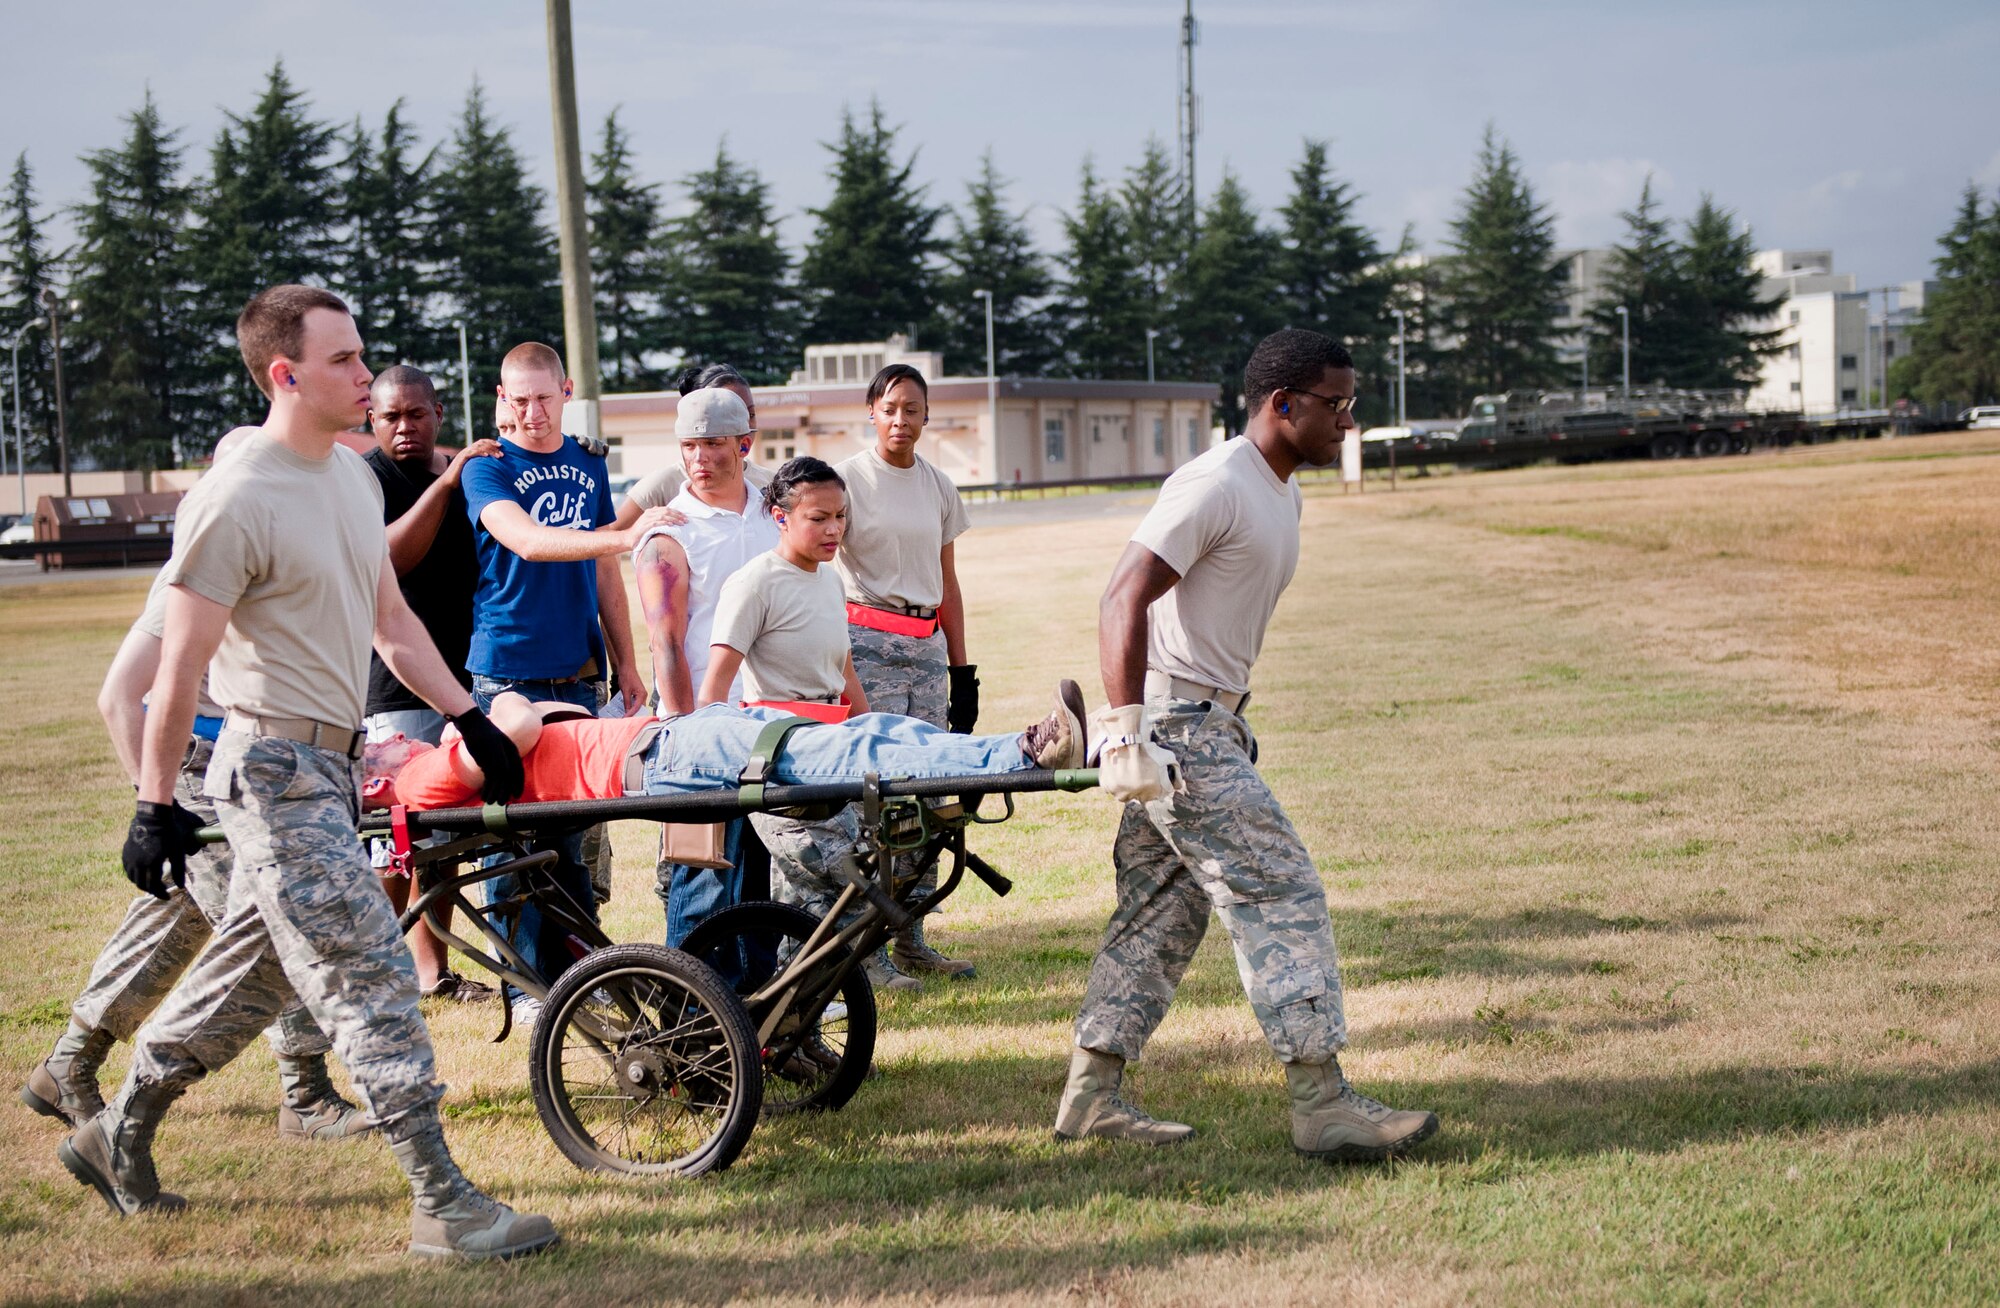 YOKOTA AIR BASE, Japan -- Airmen from the 374th Medical Group transport simulated patients to a UH-1N Iroquois during a joint Army and Air Force medical exercise at Yokota Air Base, Japan, Aug. 28, 2012. The 374 MDG set up a Mobile Aeromedical Staging Facility to care for patients in response to a simulated natural disaster. (U.S. Air Force photo by Airman 1st Class Krystal M. Garrett)